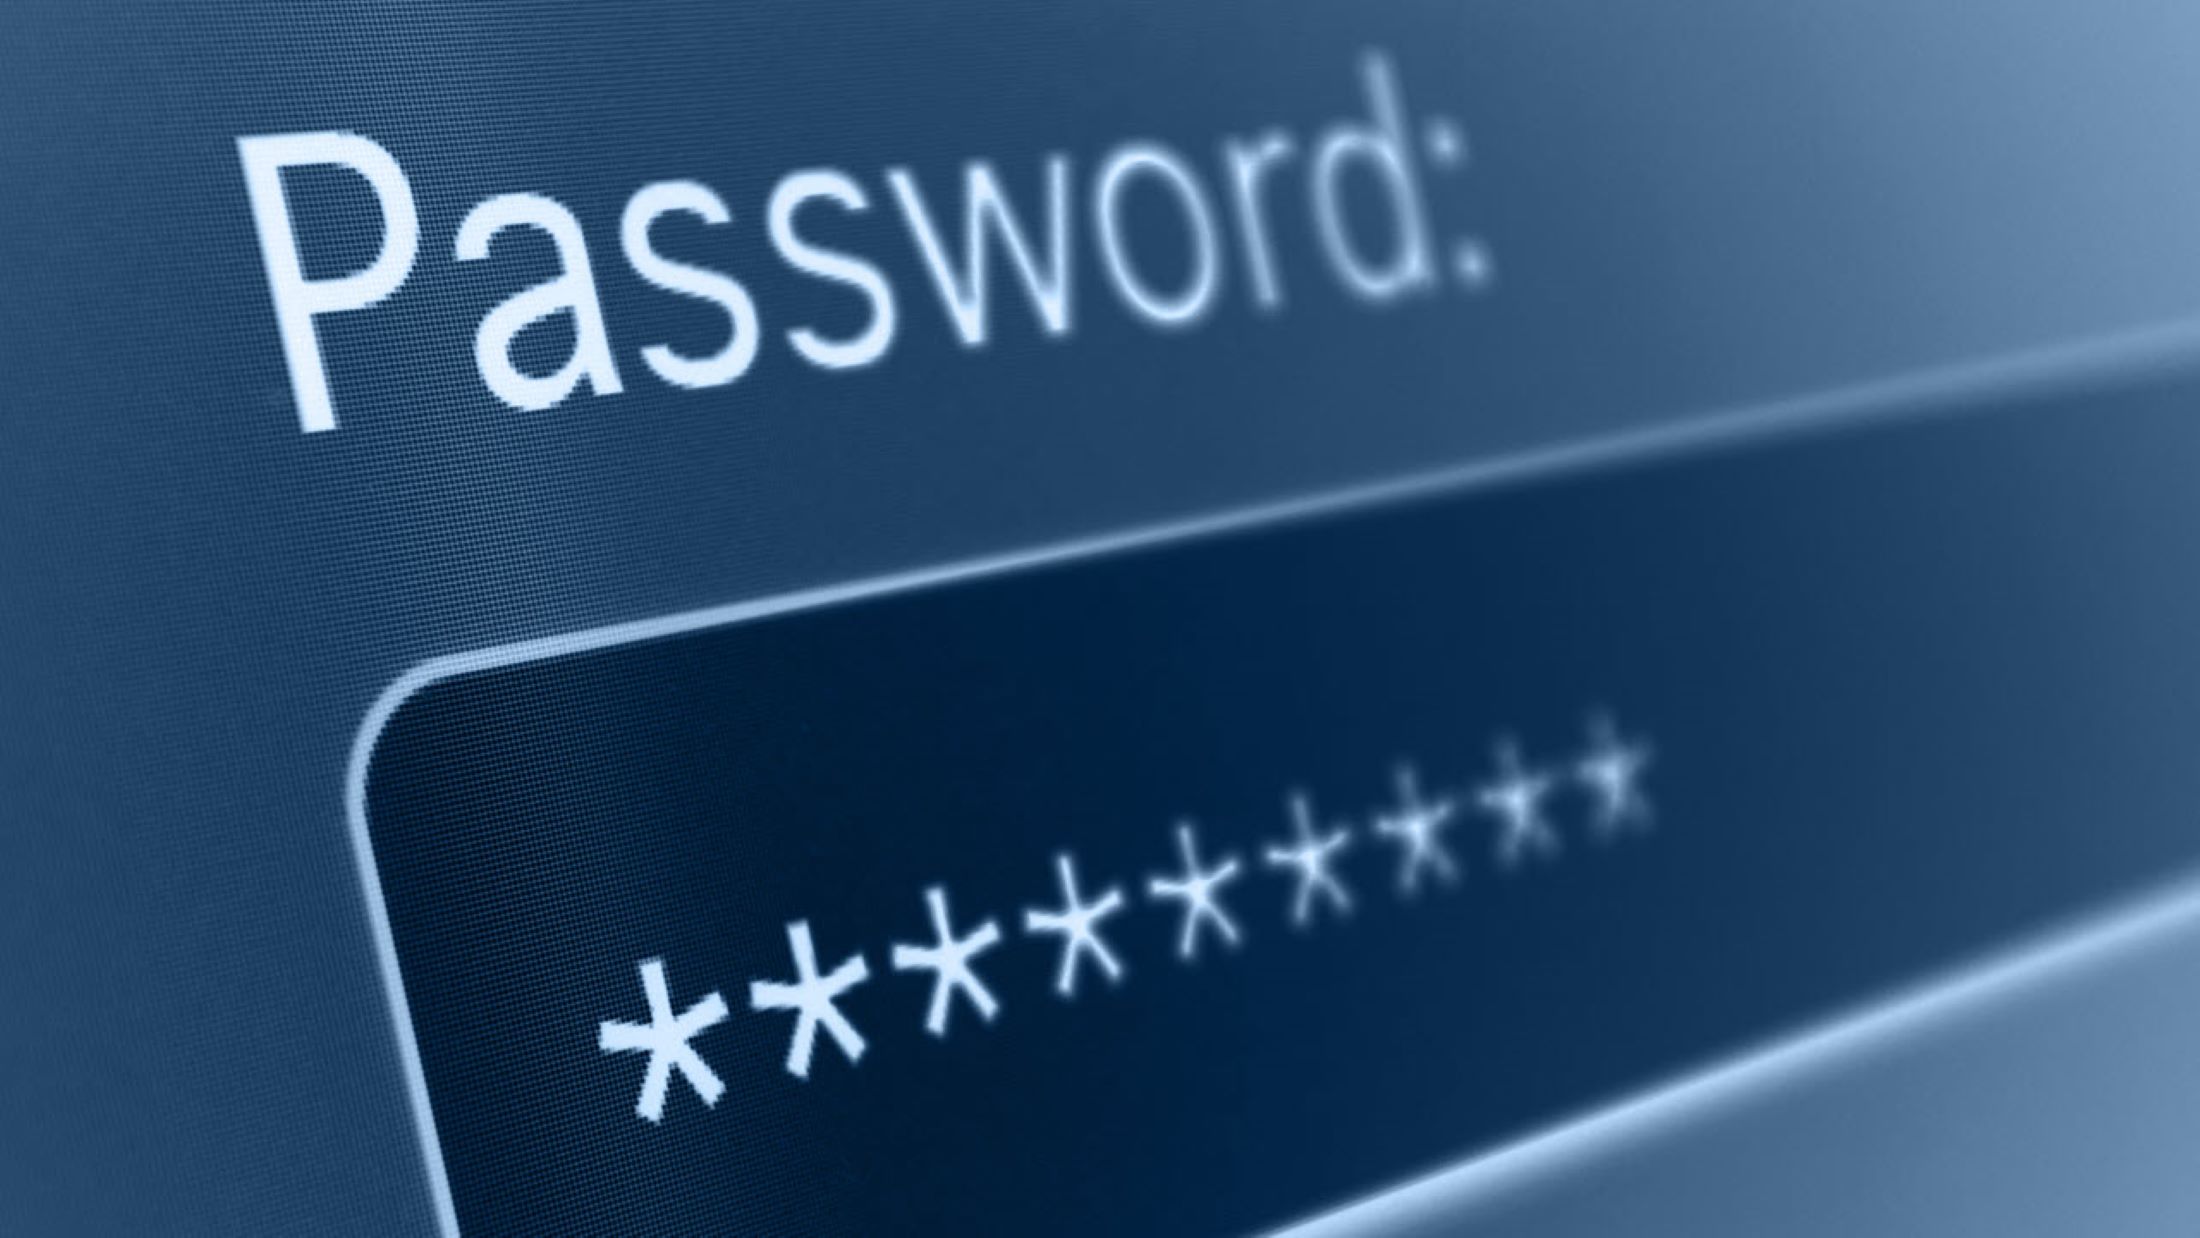 How To Find Passwords On Windows 10